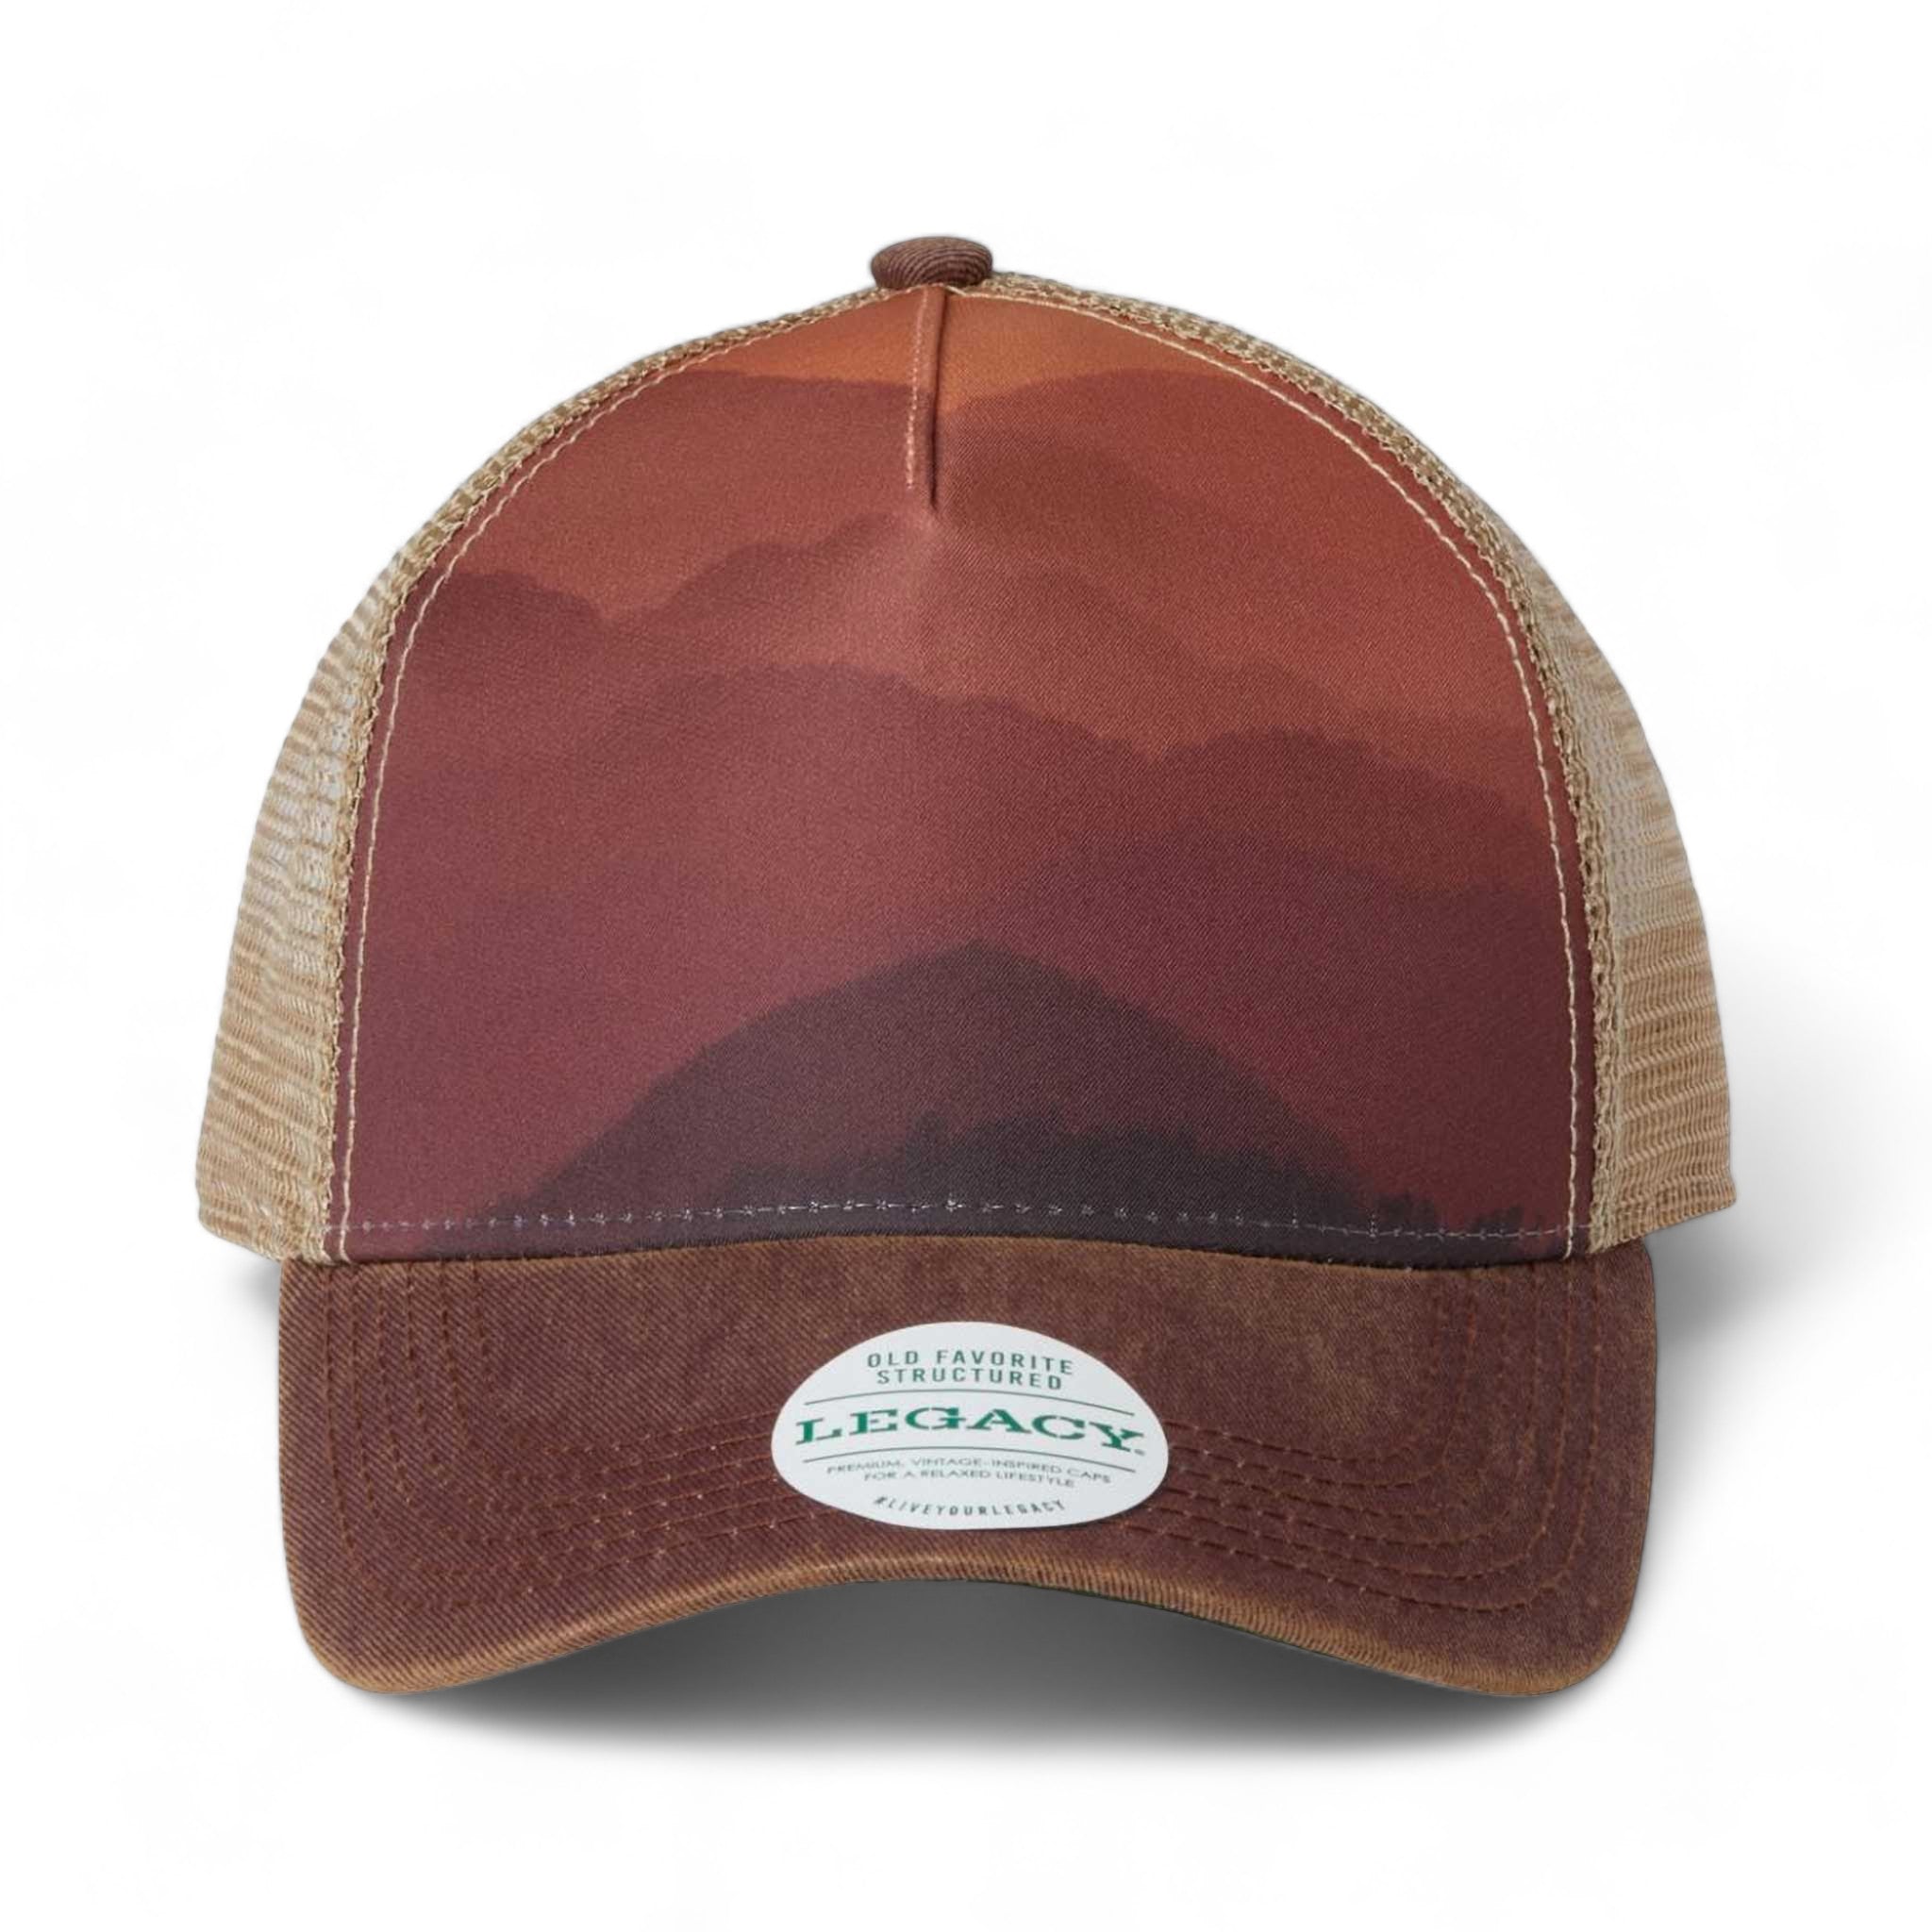 Front view of LEGACY OFAFP custom hat in mt sunset, maroon and khaki